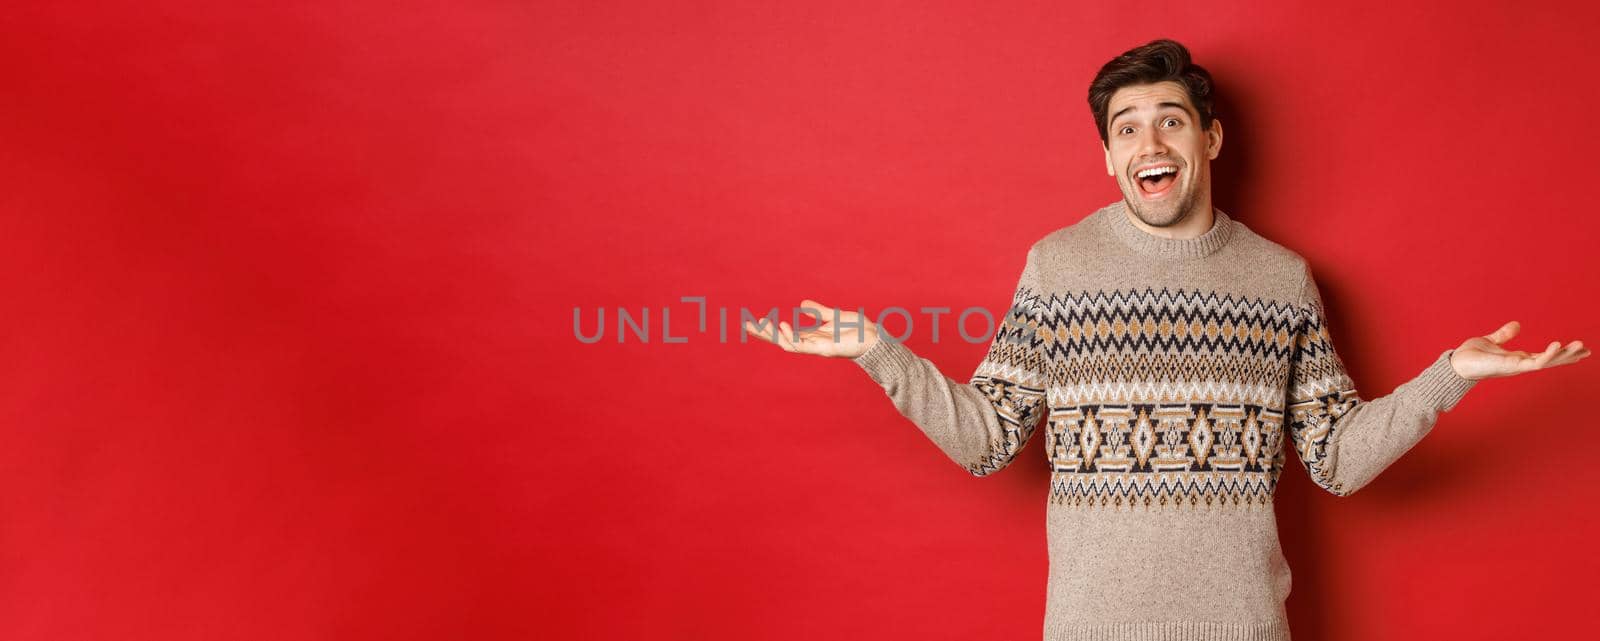 Portrait of happy and surprised, handsome caucasian guy, wearing christmas sweater, spread hands sideways and looking clueless, standing over red background.